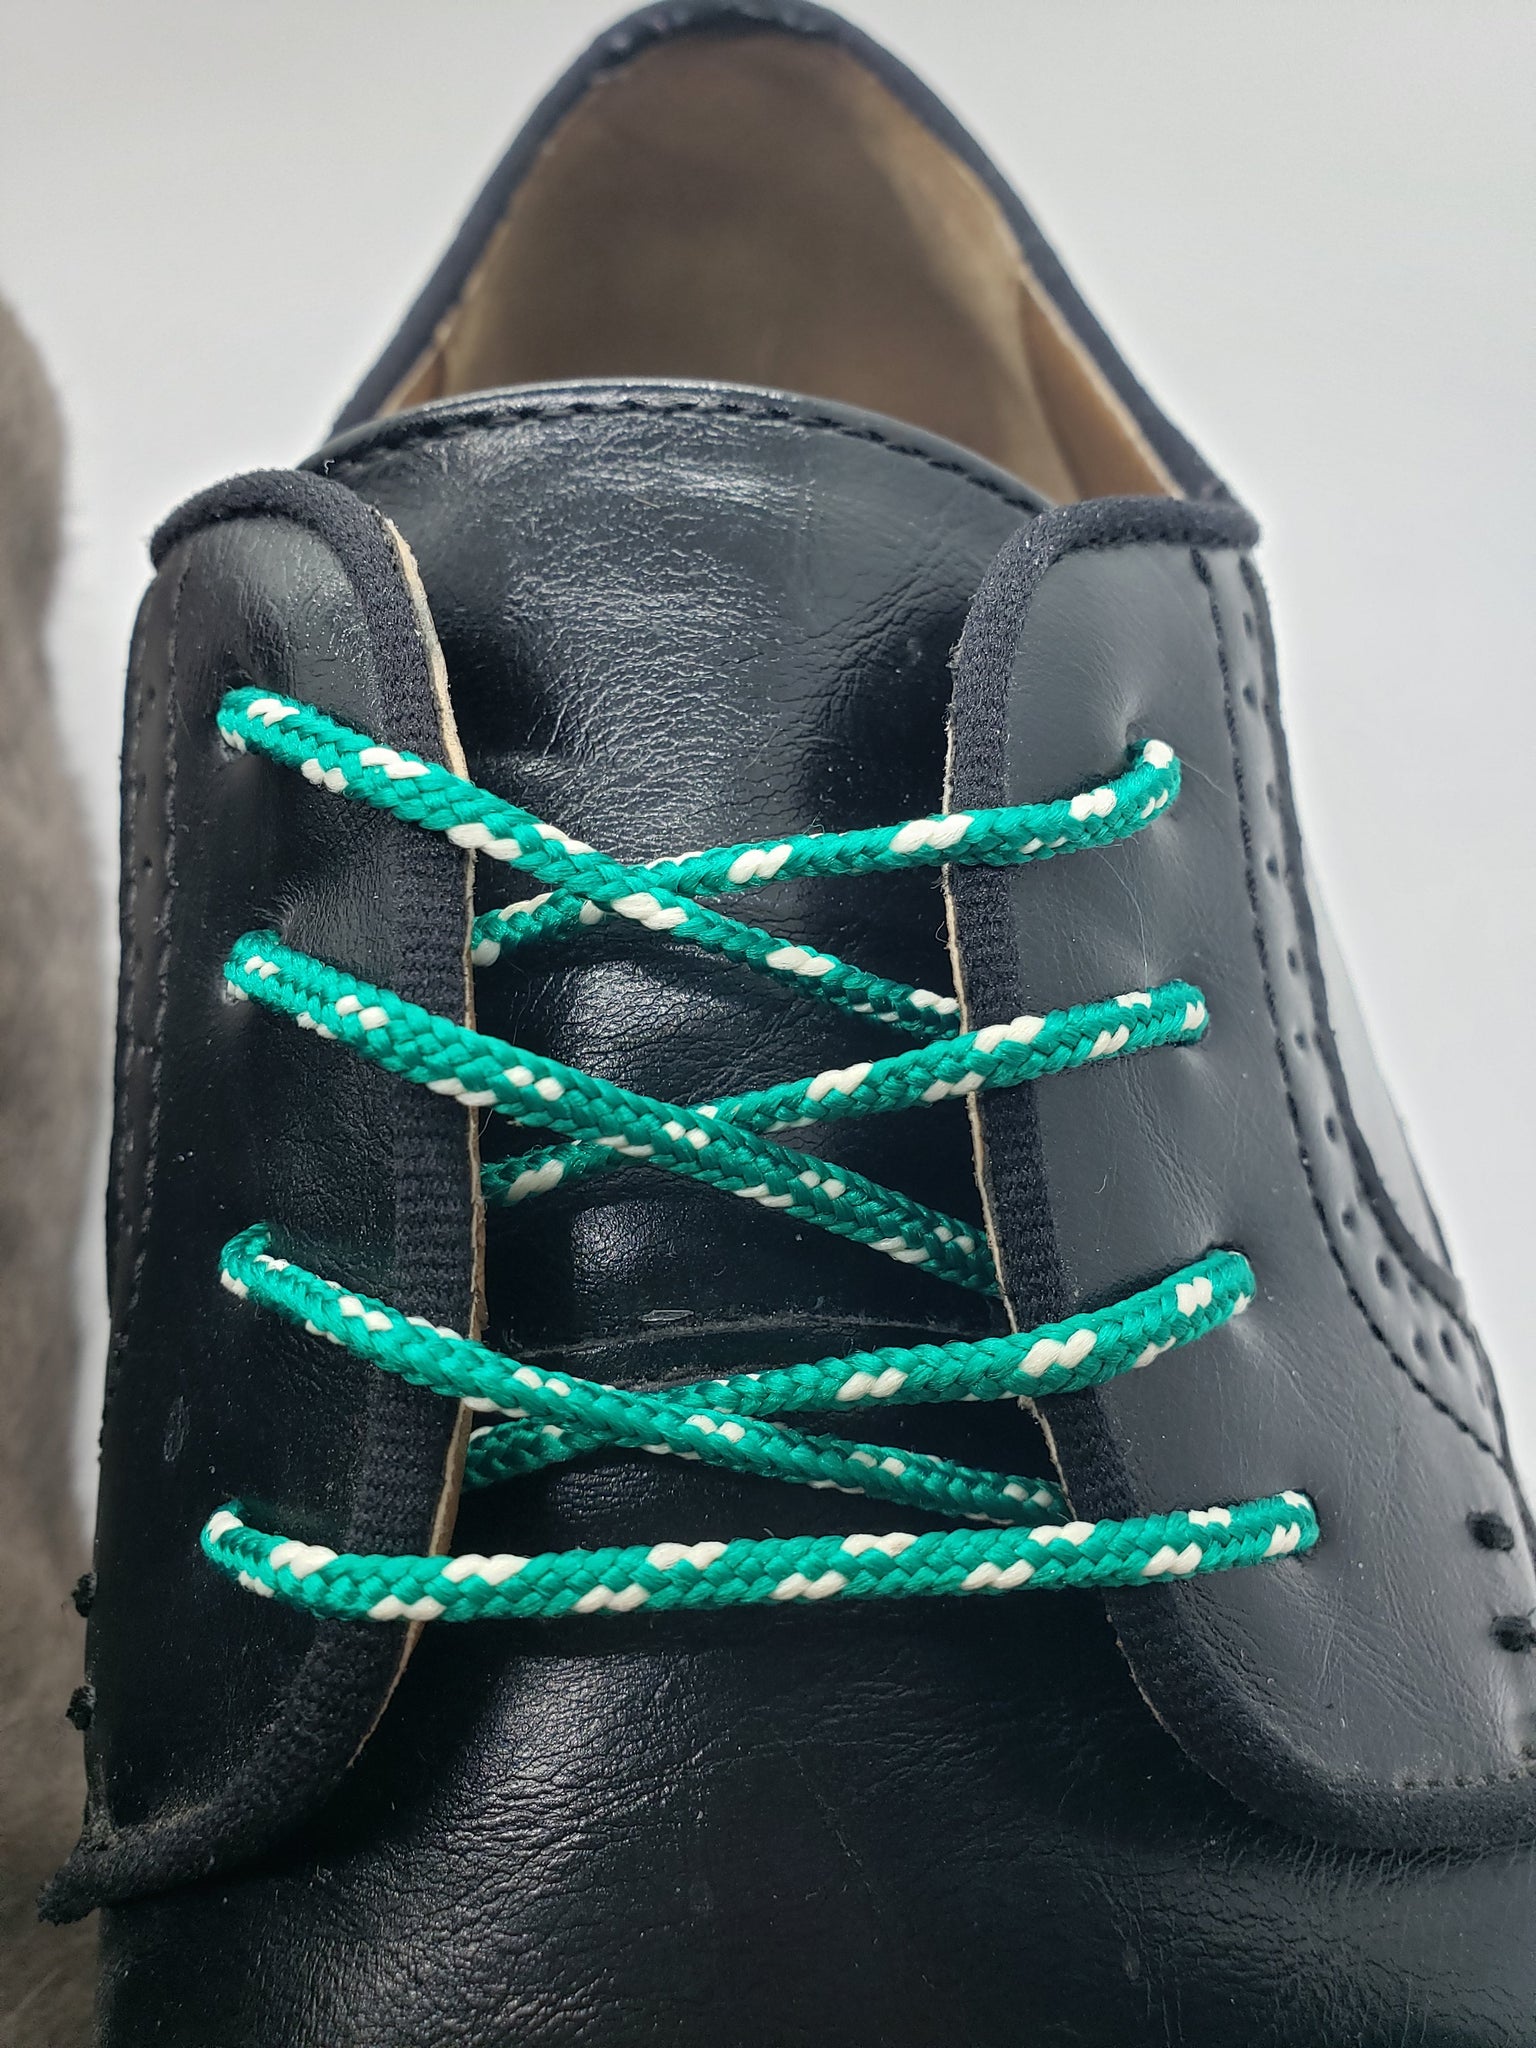 Round Dress Shoelaces - Green with White Accents